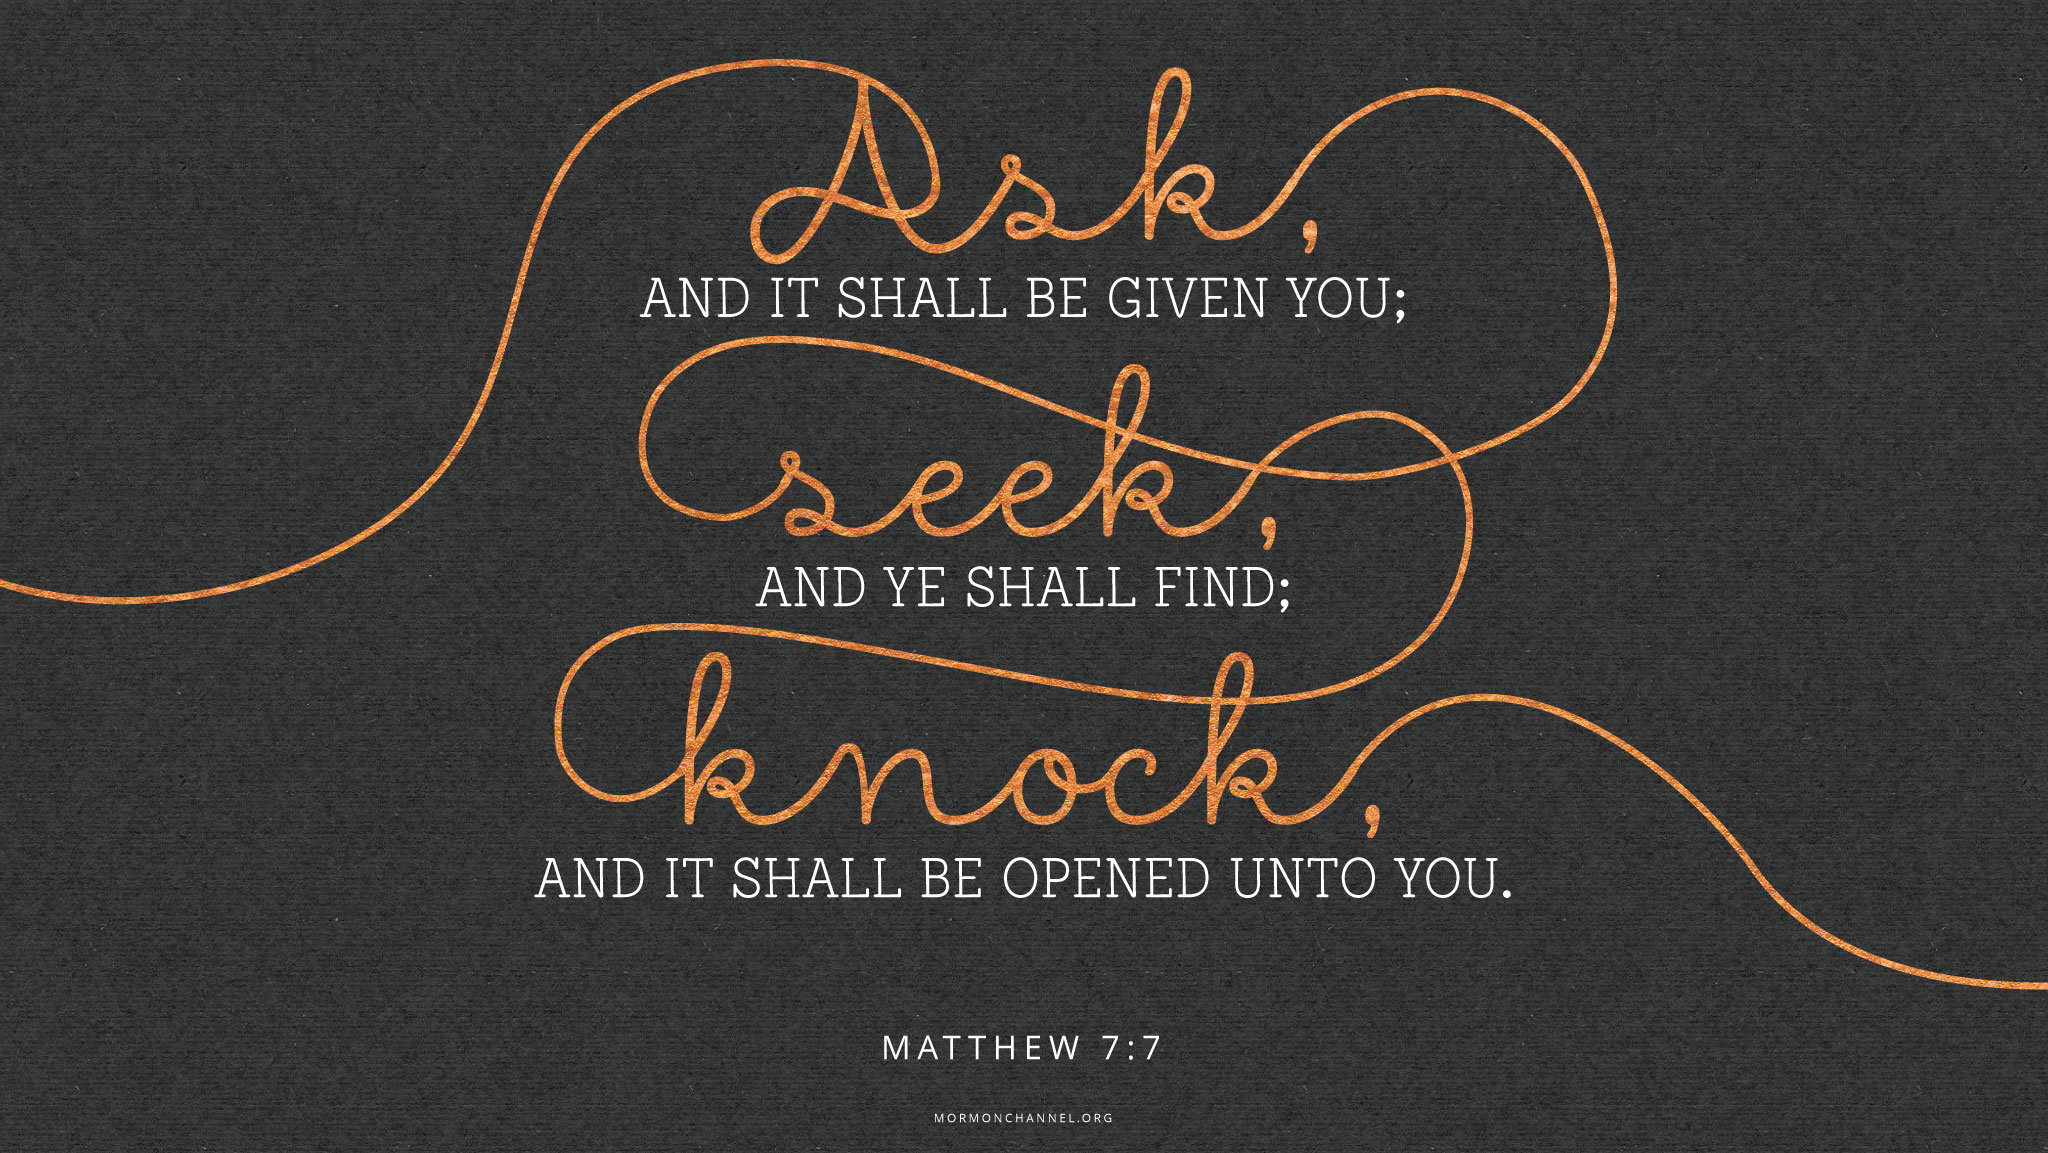 Daily Quote: Ask, Seek, and Knock | Mormon Channel